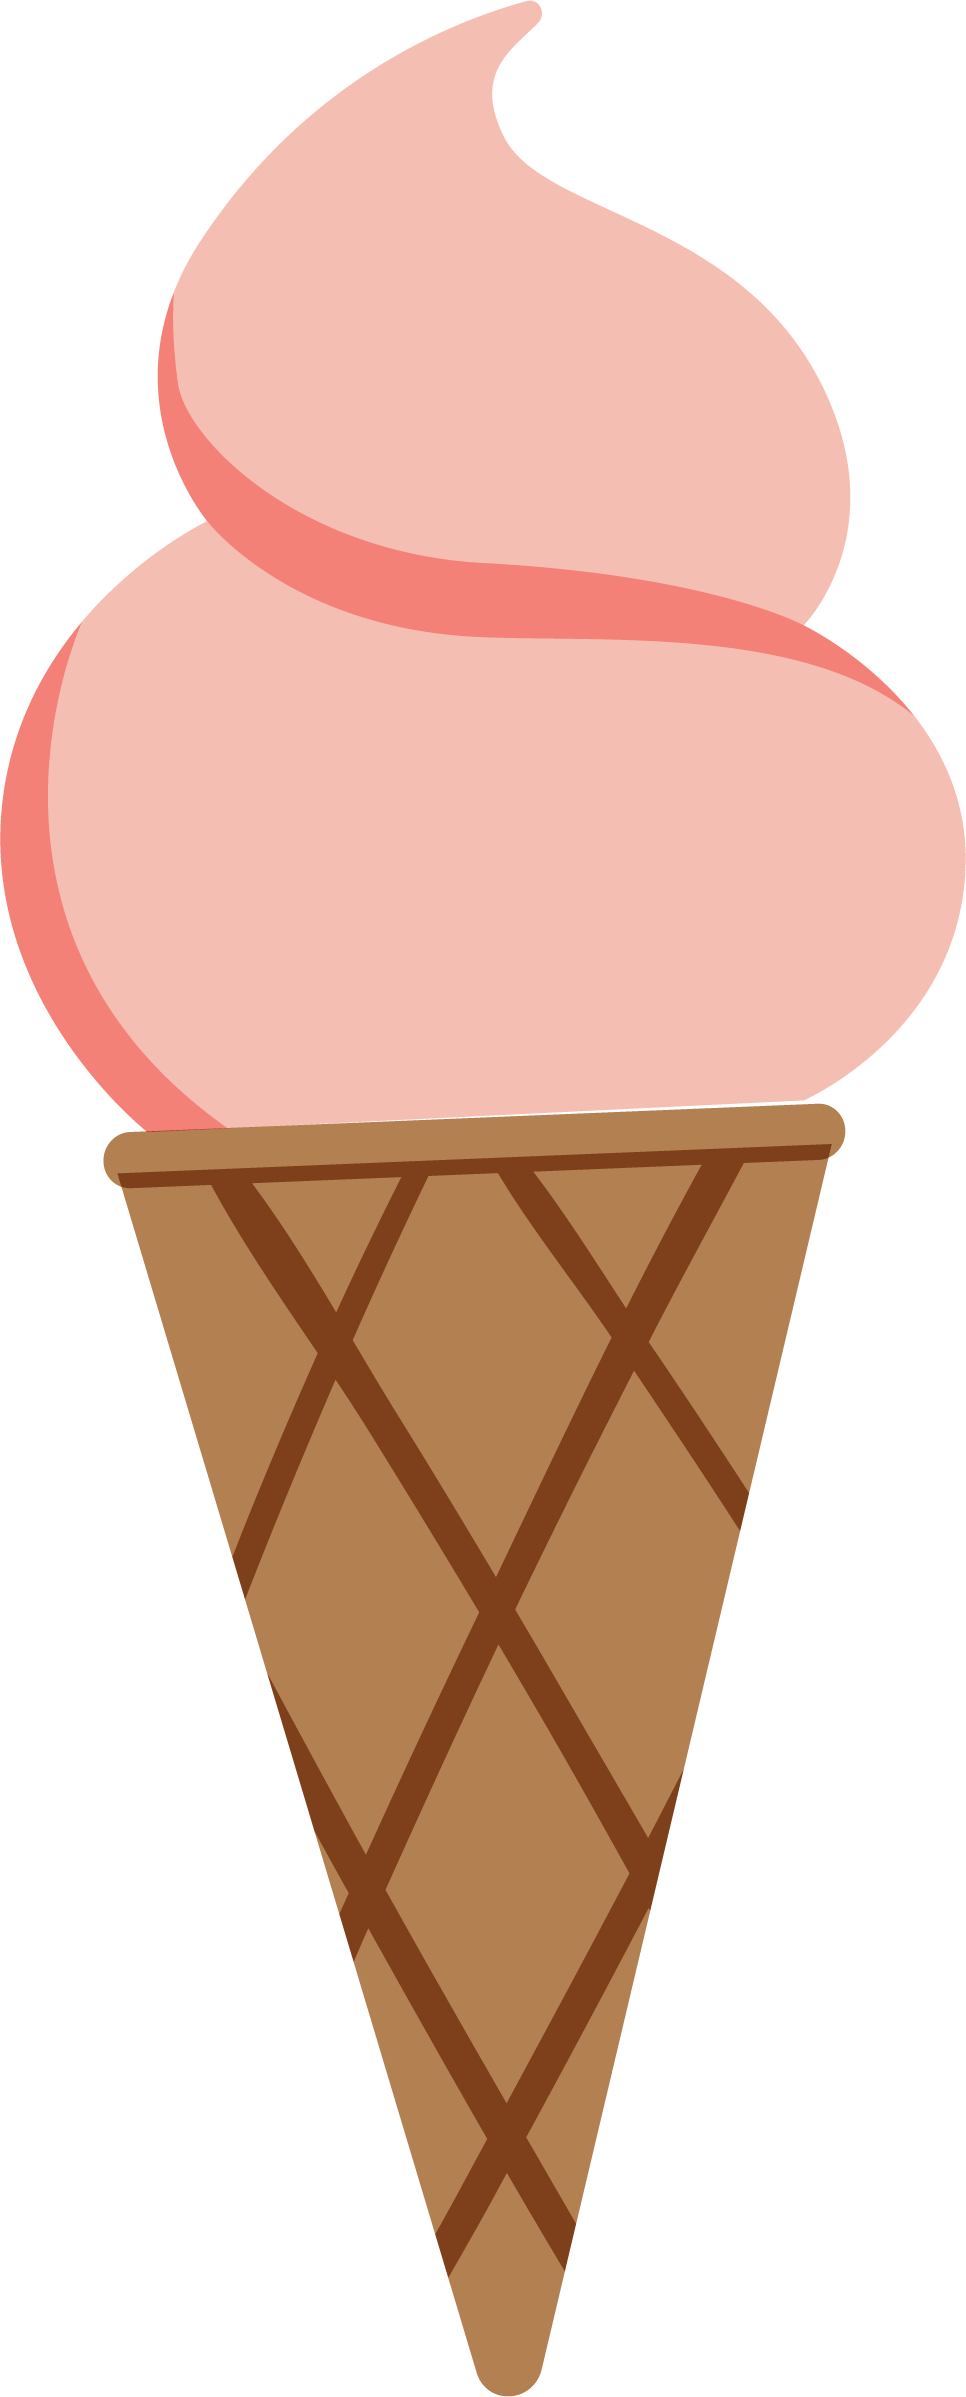 Ice Cream Cone Svg File Dxf File By Hopscotch Designs Thehungryjpeg Ph 9294